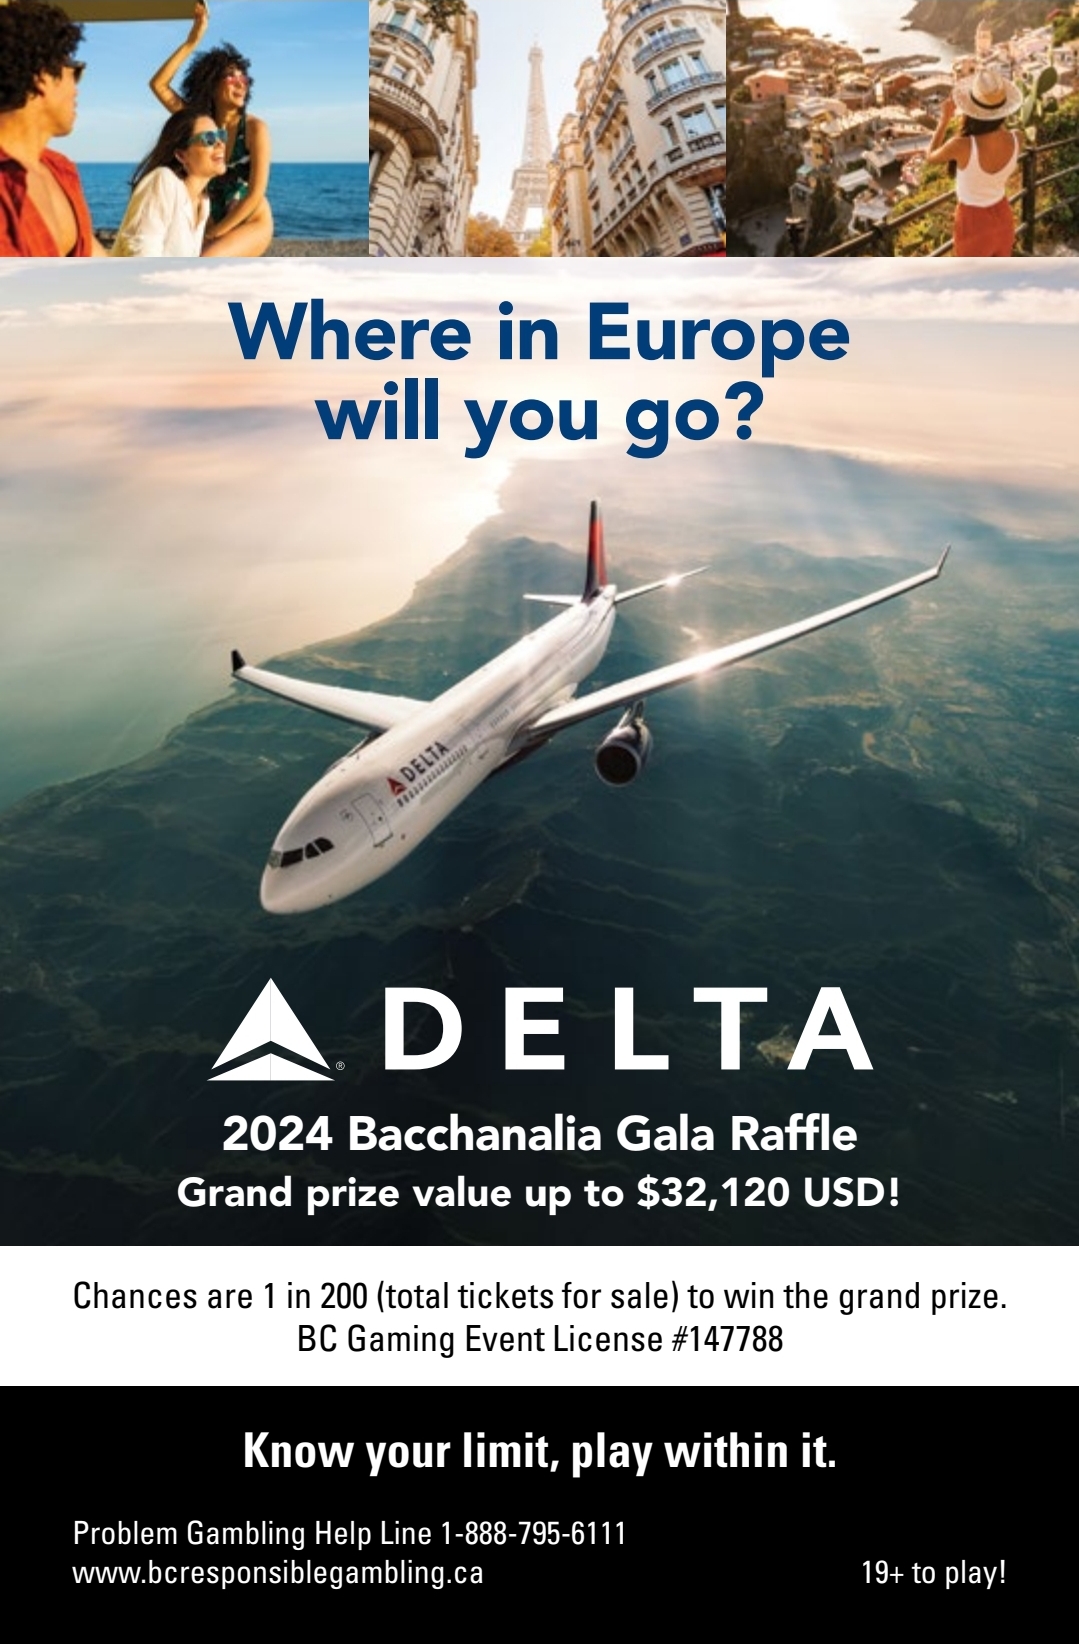 Delta plane in the sky with photos of Europe around it